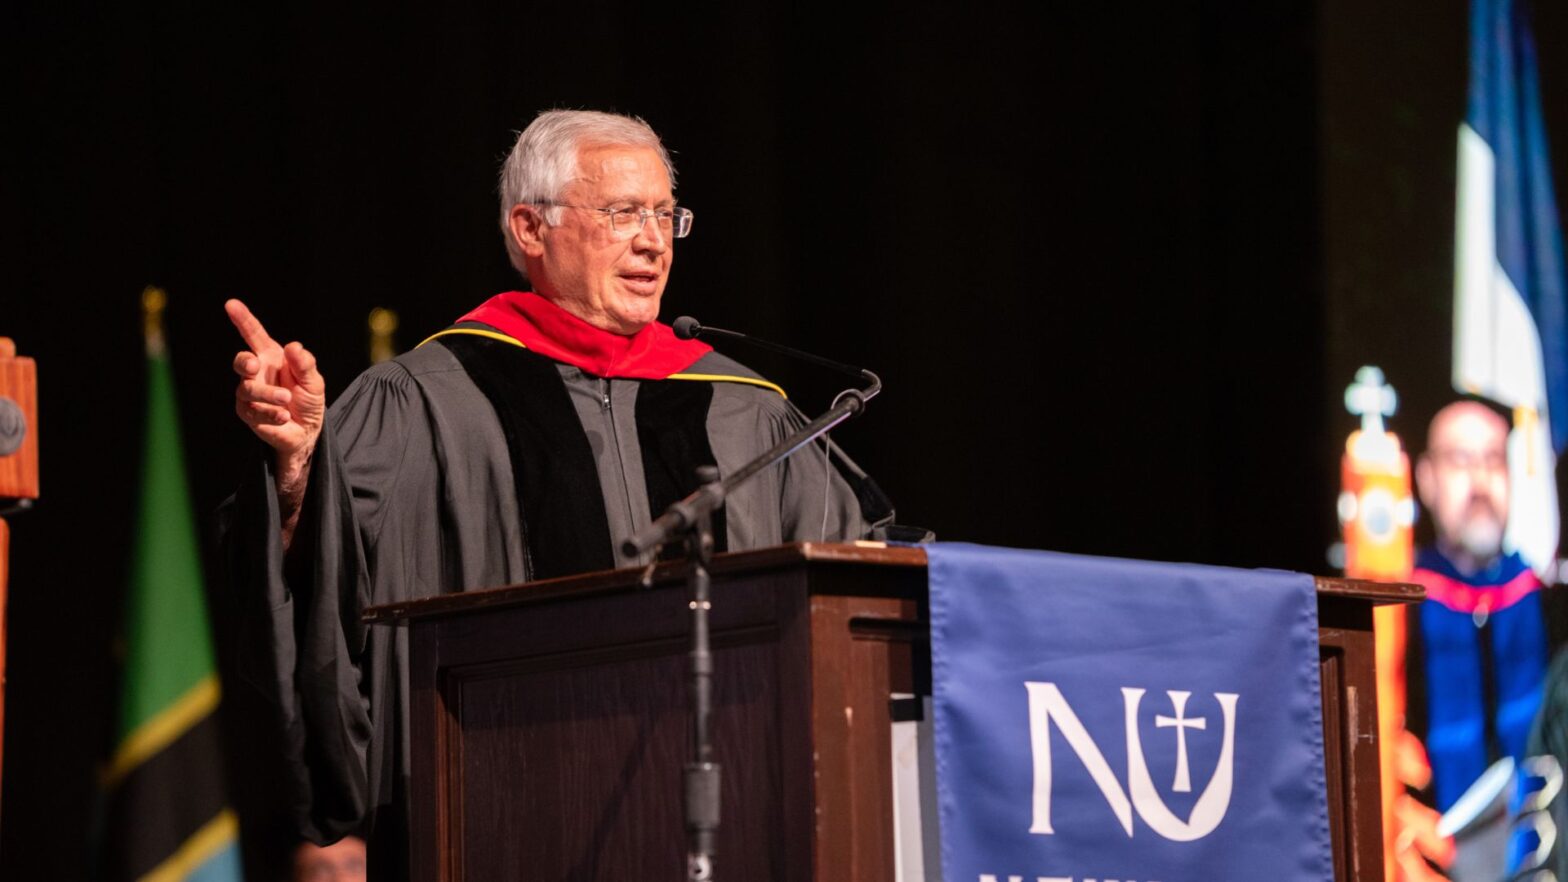 Father Tom Welk gives his commencement address to Newman University graduates on May 10.